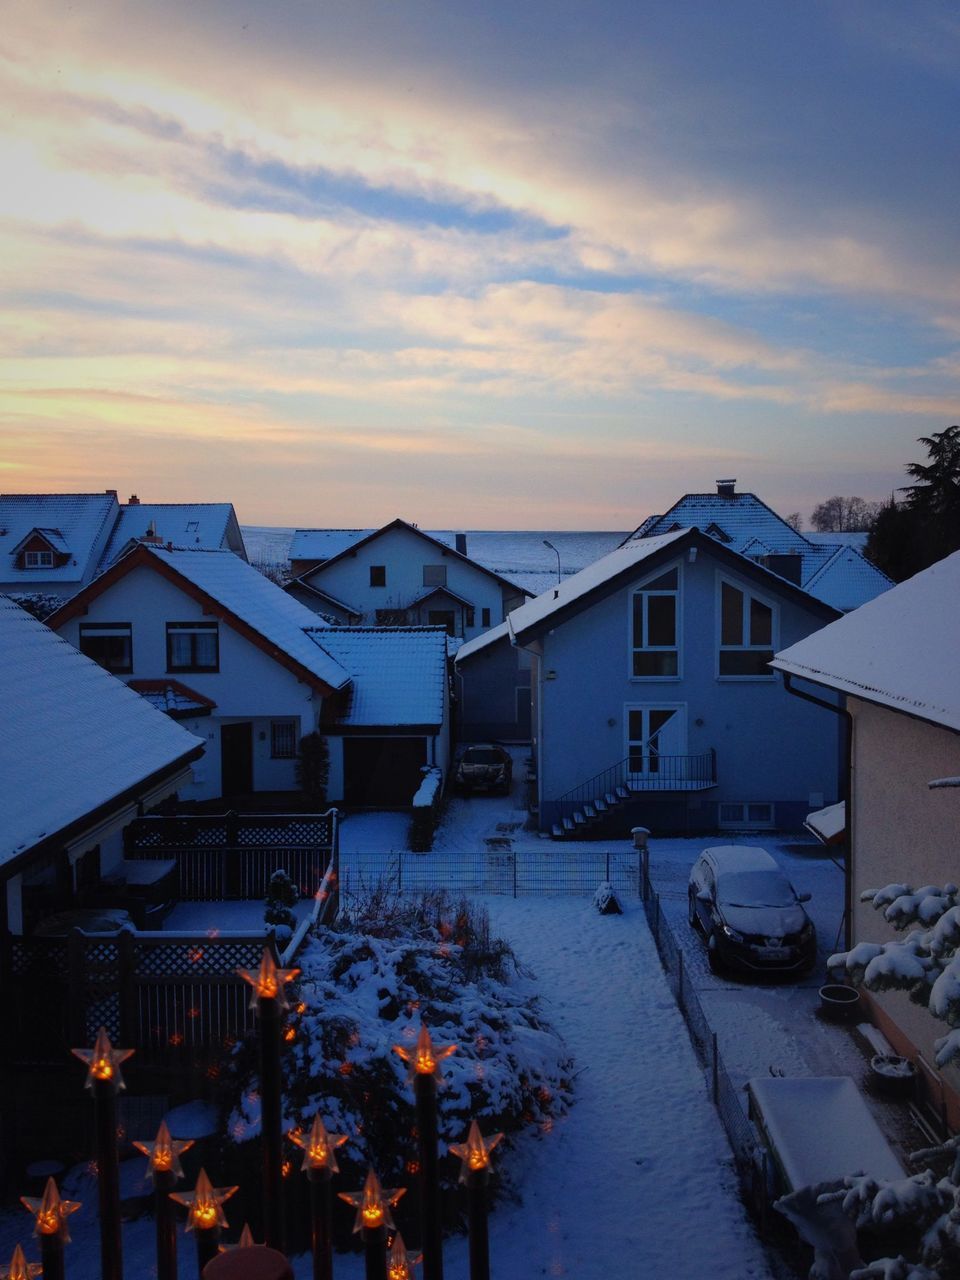 snow, winter, building exterior, cold temperature, architecture, built structure, sky, season, cloud - sky, weather, house, sunset, residential structure, residential building, covering, cloudy, frozen, nature, cloud, outdoors